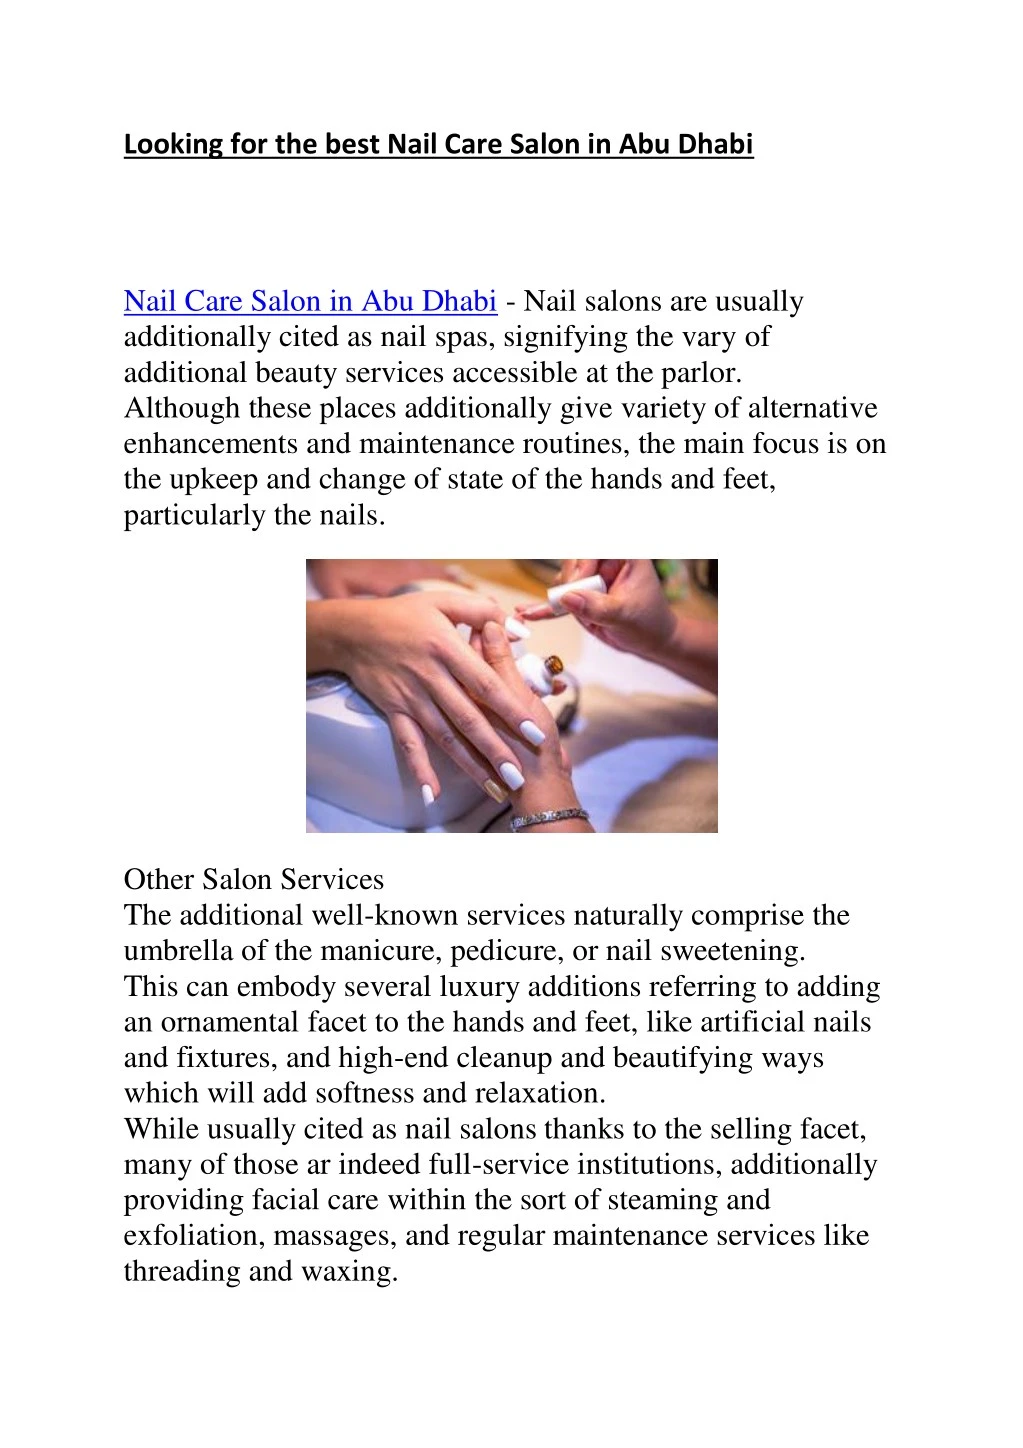 looking for the best nail care salon in abu dhabi